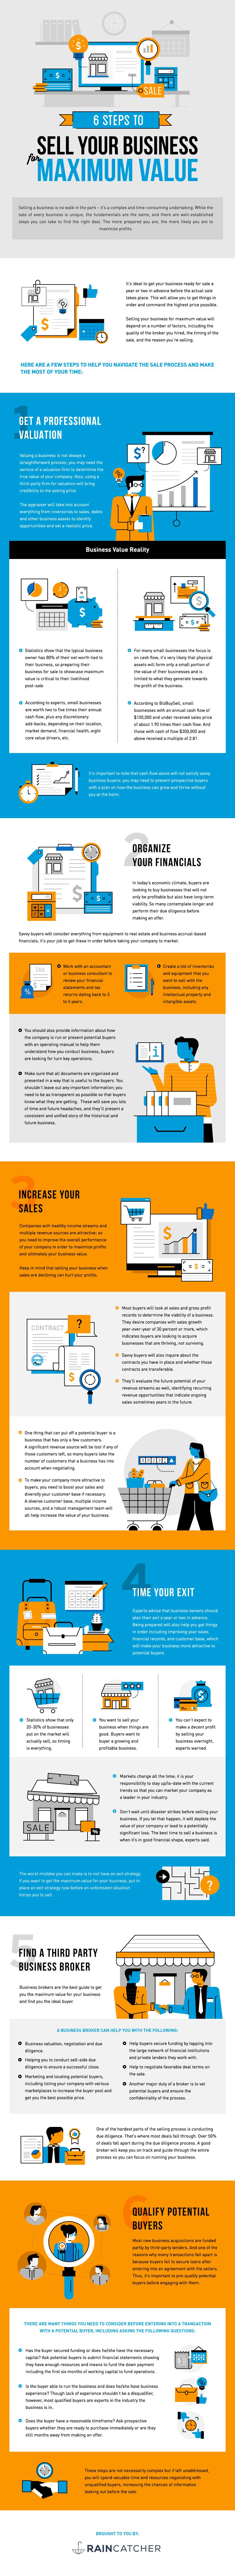 6 steps to sell your business